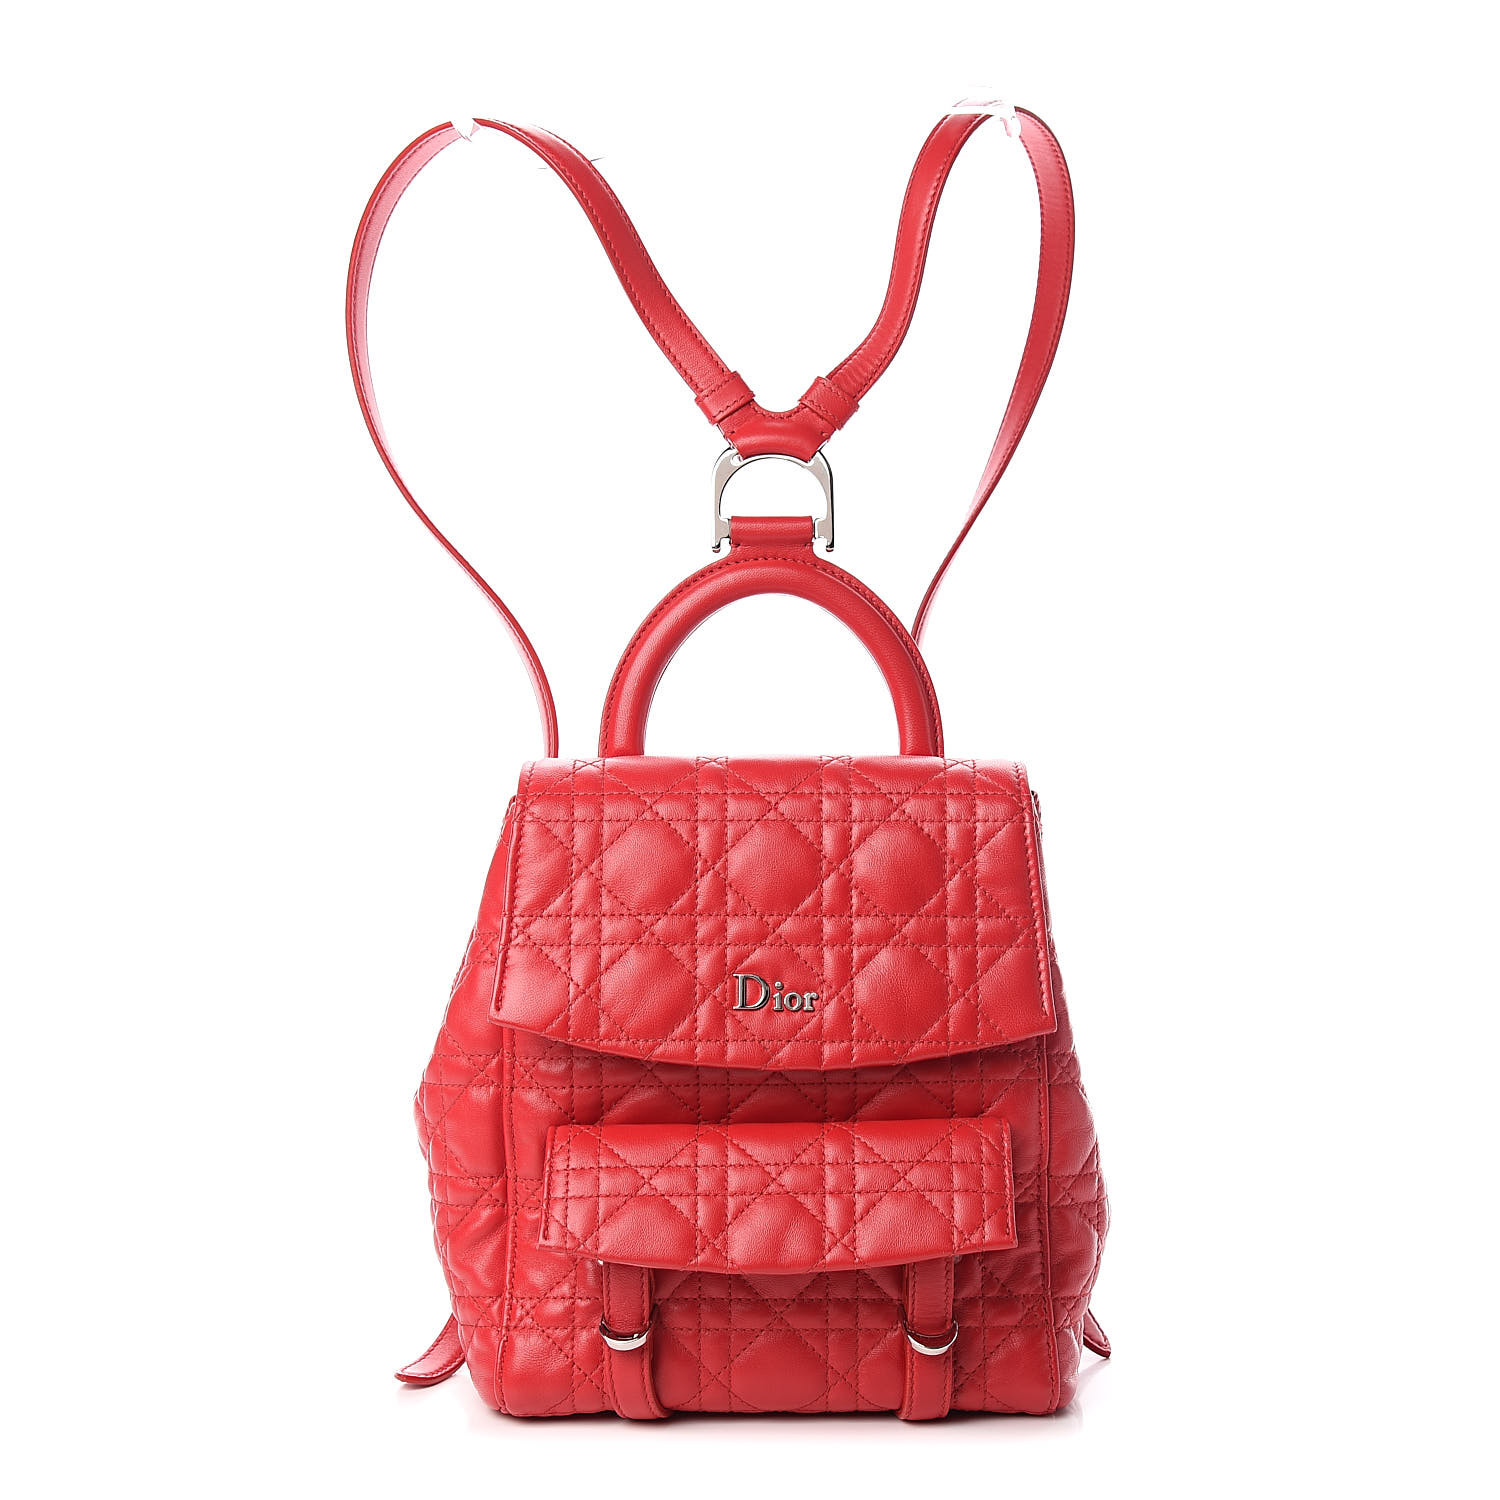 CHRISTIAN DIOR Lambskin Cannage Small Stardust Backpack Red 526042